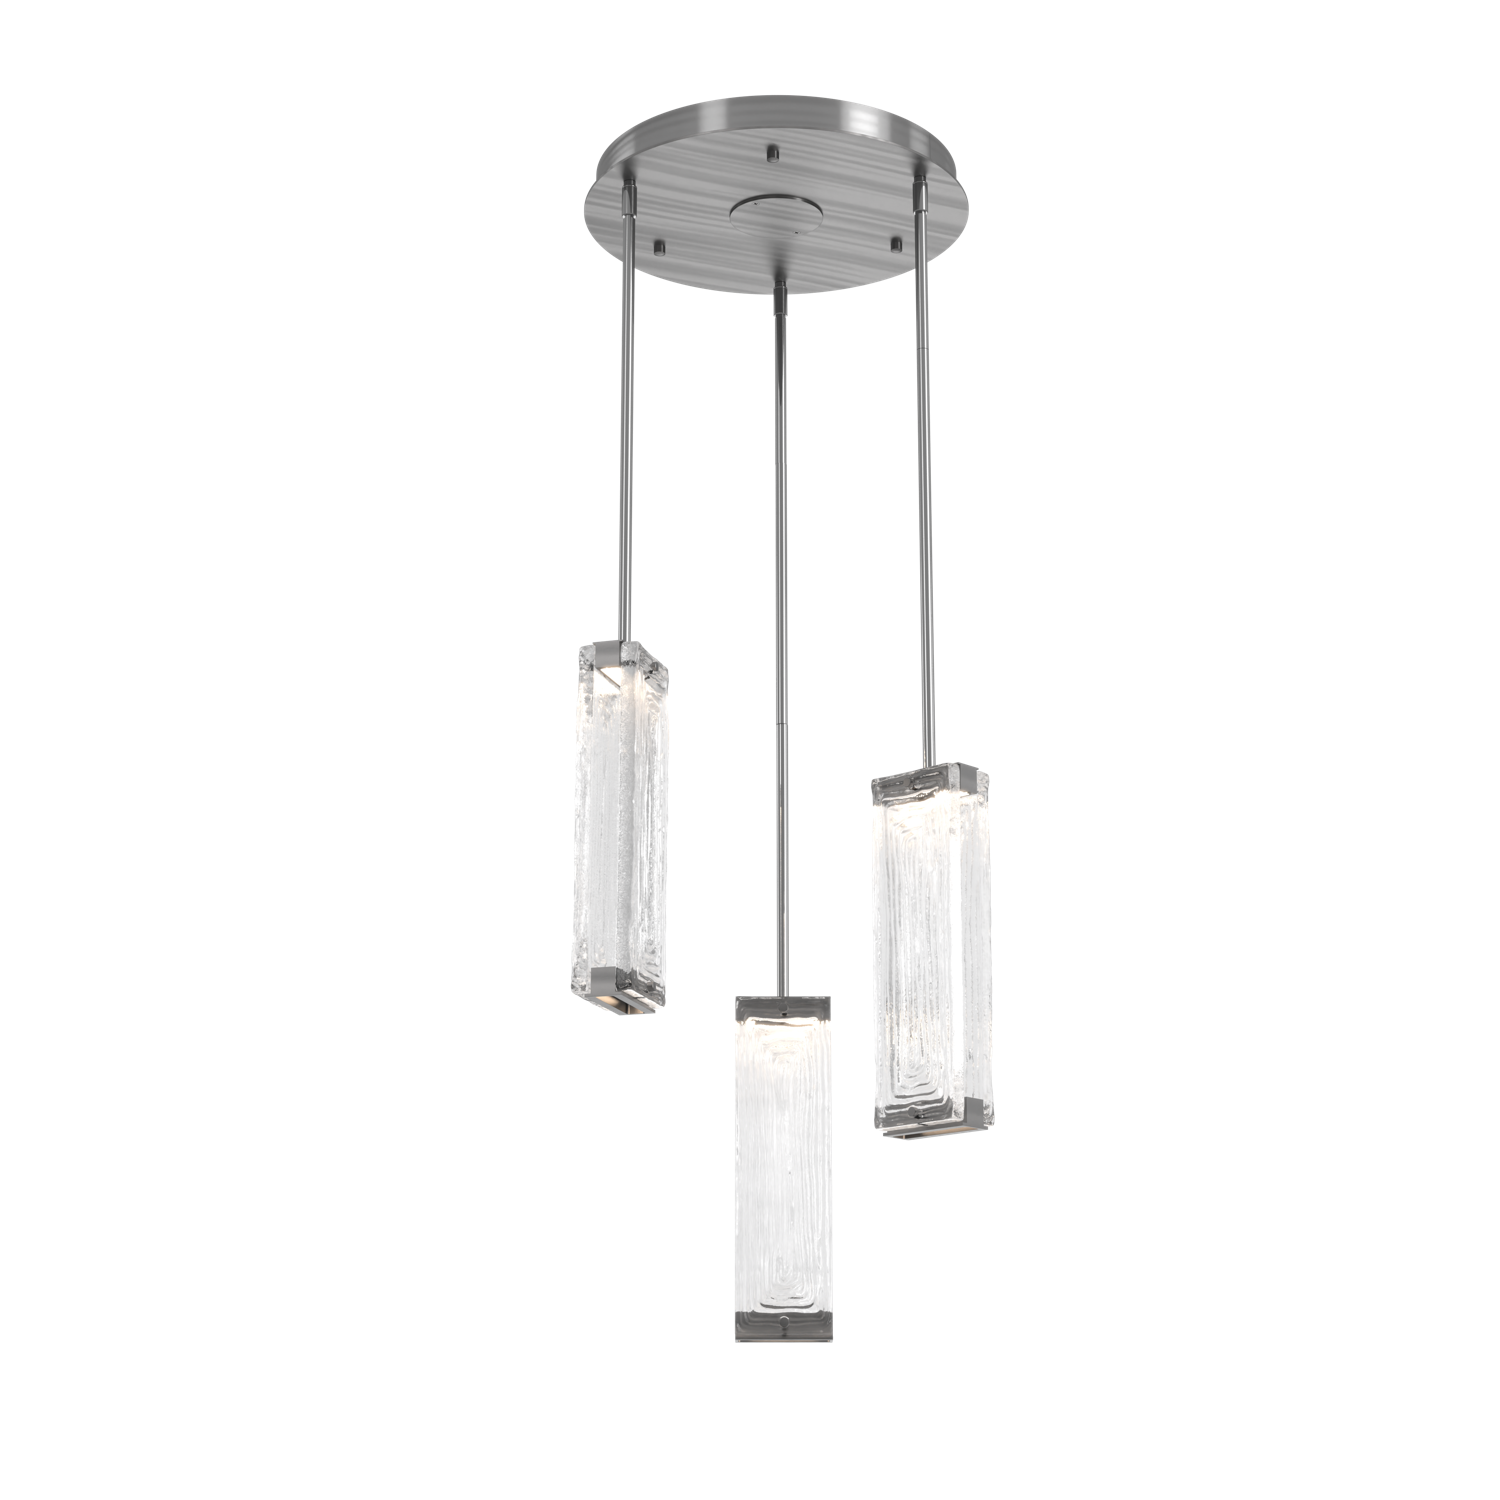 CHB0090-03-SN-TL-Hammerton-Studio-Tabulo-3-light-multi-pendant-chandelier-with-satin-nickel-finish-and-clear-linea-cast-glass-shade-and-LED-lamping